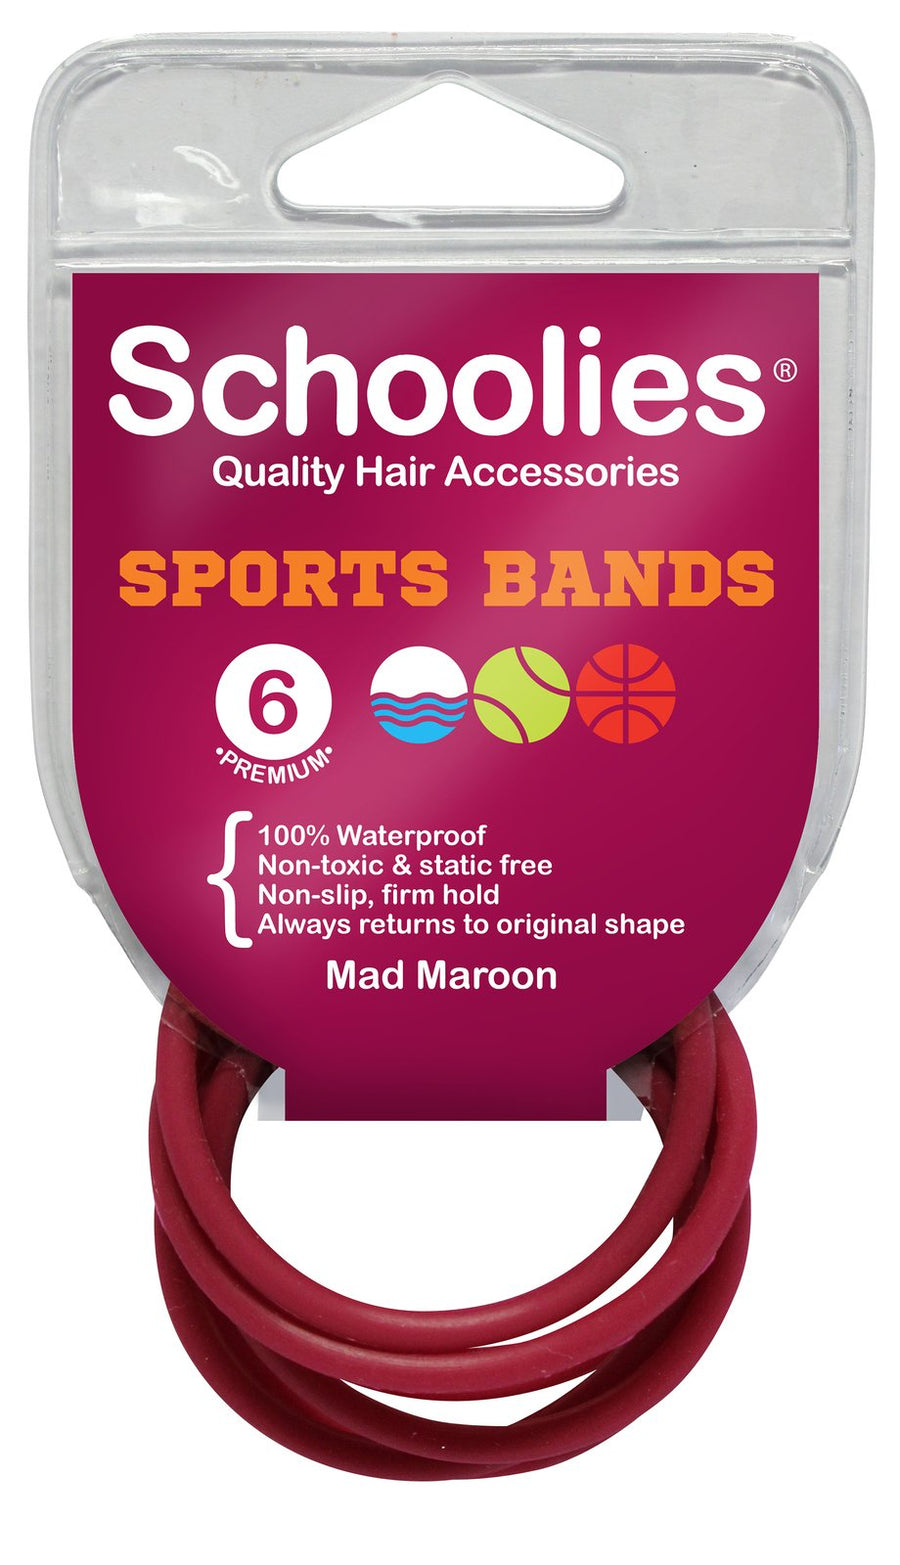 Schoolies Sports Bands 6pc Mad Maroon